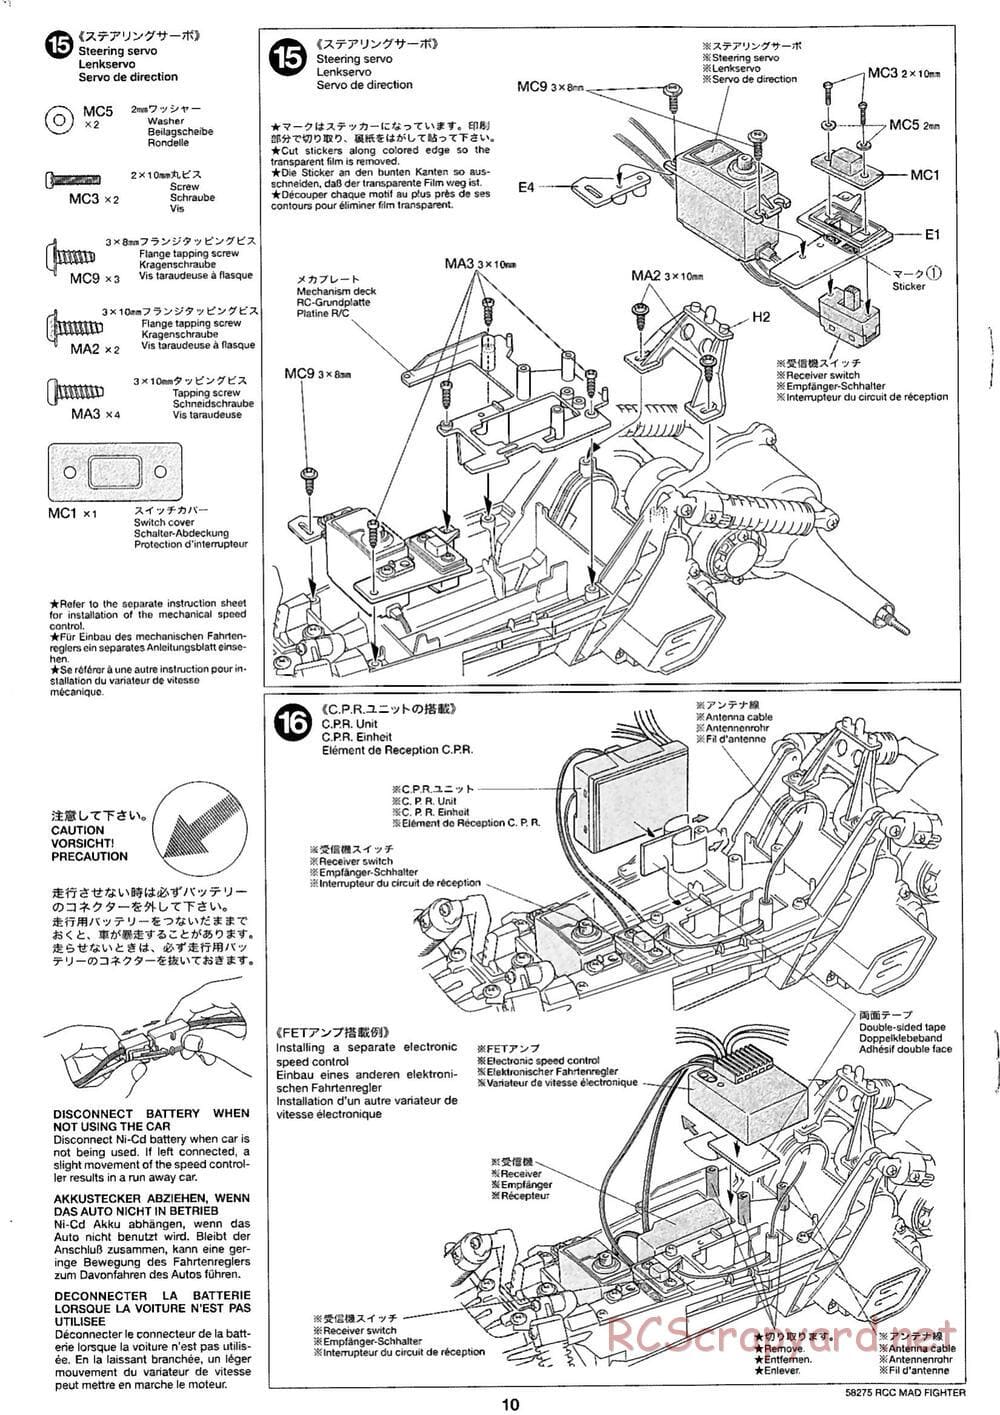 Tamiya - Mad Fighter Chassis - Manual - Page 10